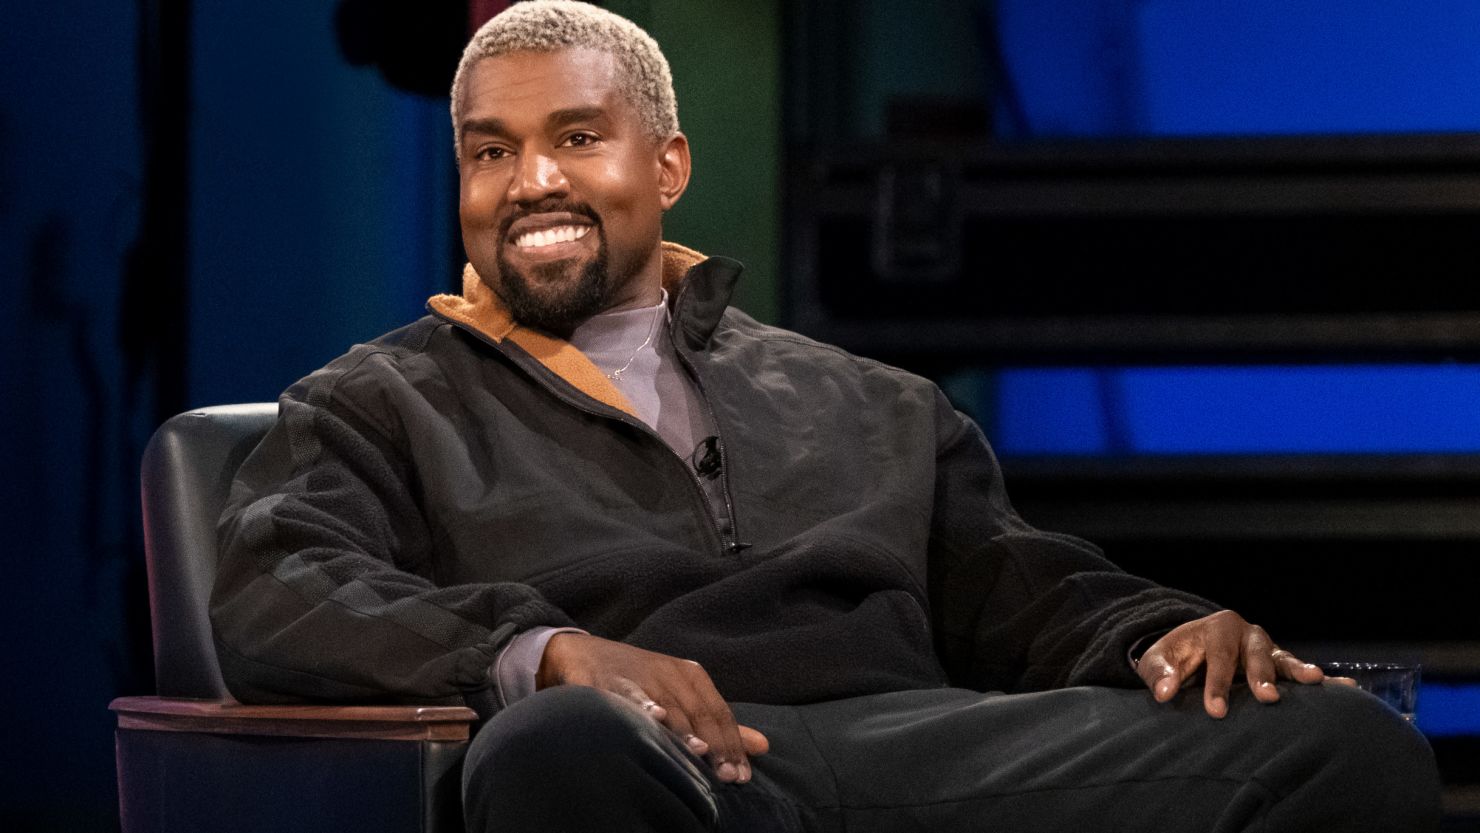 Kanye West opens up about managing his mental health in David